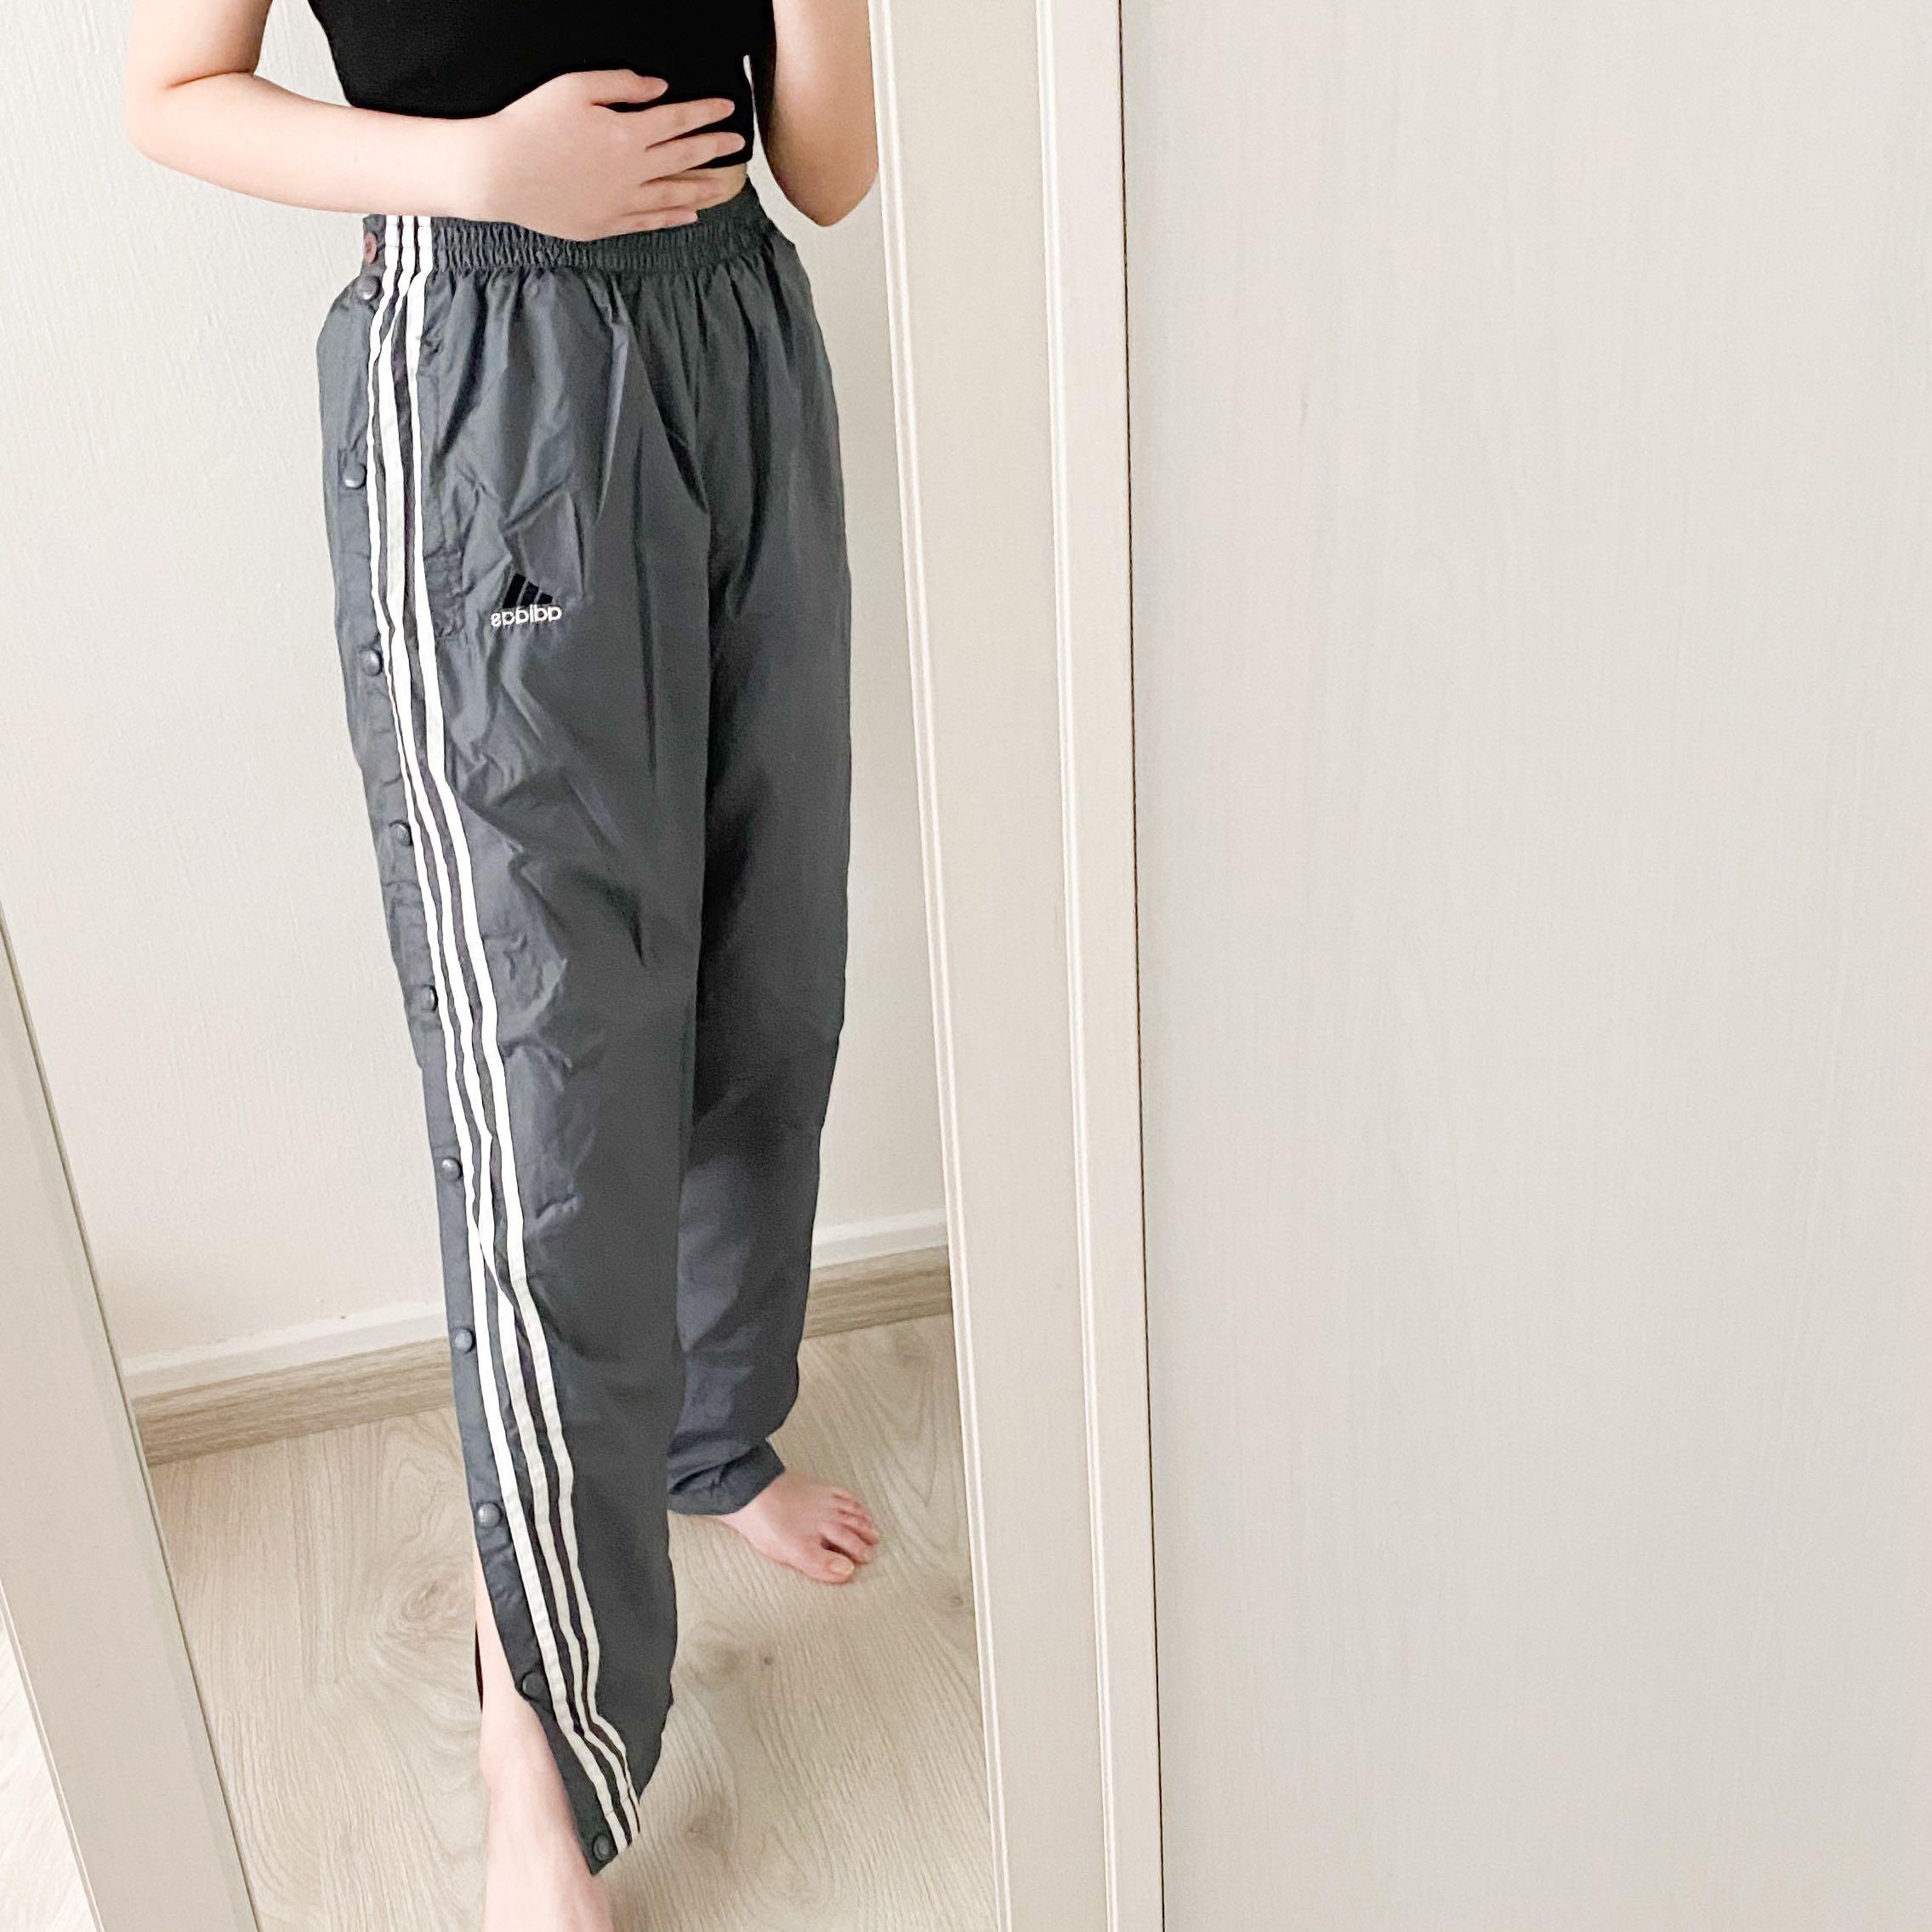 How Street Style Stars and Celebrities Wear Track Pants | POPSUGAR Fashion